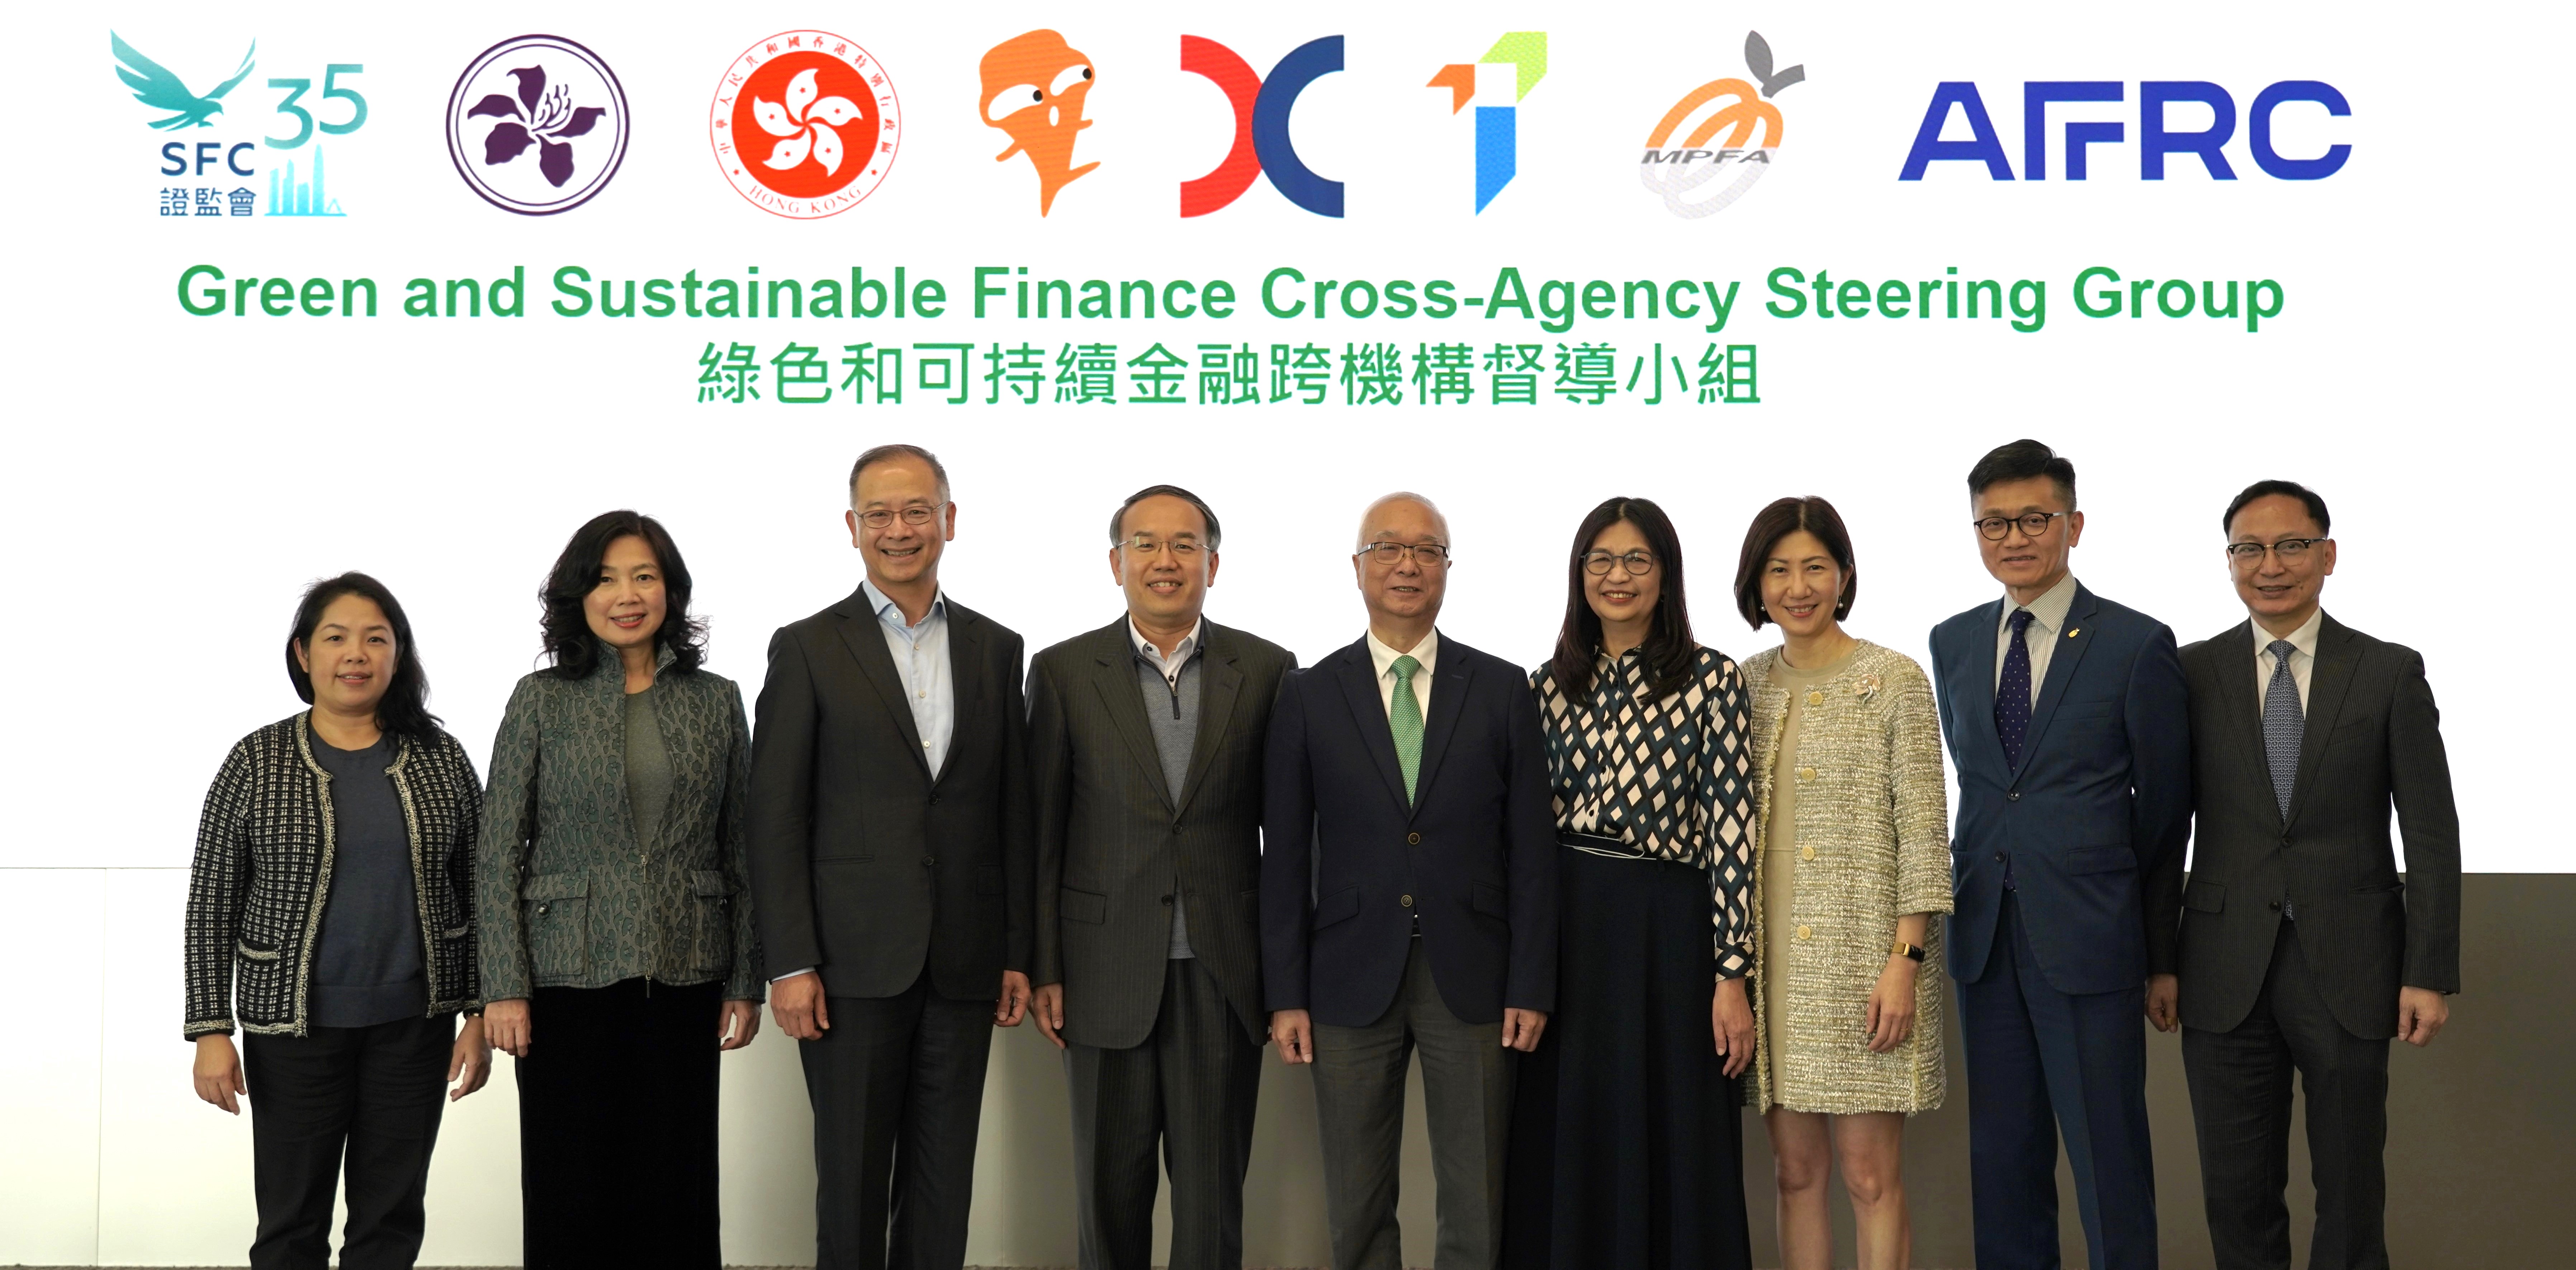 The meeting of the Green and Sustainable Finance Cross-Agency Steering Group is attended by (from left to right): Janey Lai, Acting Chief Executive Officer, Accounting and Financial Reporting Council; Salina Yan, Permanent Secretary for Financial Services and the Treasury (Financial Services); Eddie Yue, Chief Executive, Hong Kong Monetary Authority; Christopher Hui, Secretary for Financial Services and the Treasury; Tse Chin-wan, Secretary for Environment and Ecology; Julia Leung, Chief Executive Officer, Securities and Futures Commission; Bonnie Chan, Co-Chief Operating Officer, Hong Kong Exchanges and Clearing Limited; Cheng Yan-chee, Managing Director, Mandatory Provident Fund Schemes Authority; Clement Cheung, Chief Executive Officer, Insurance Authority.